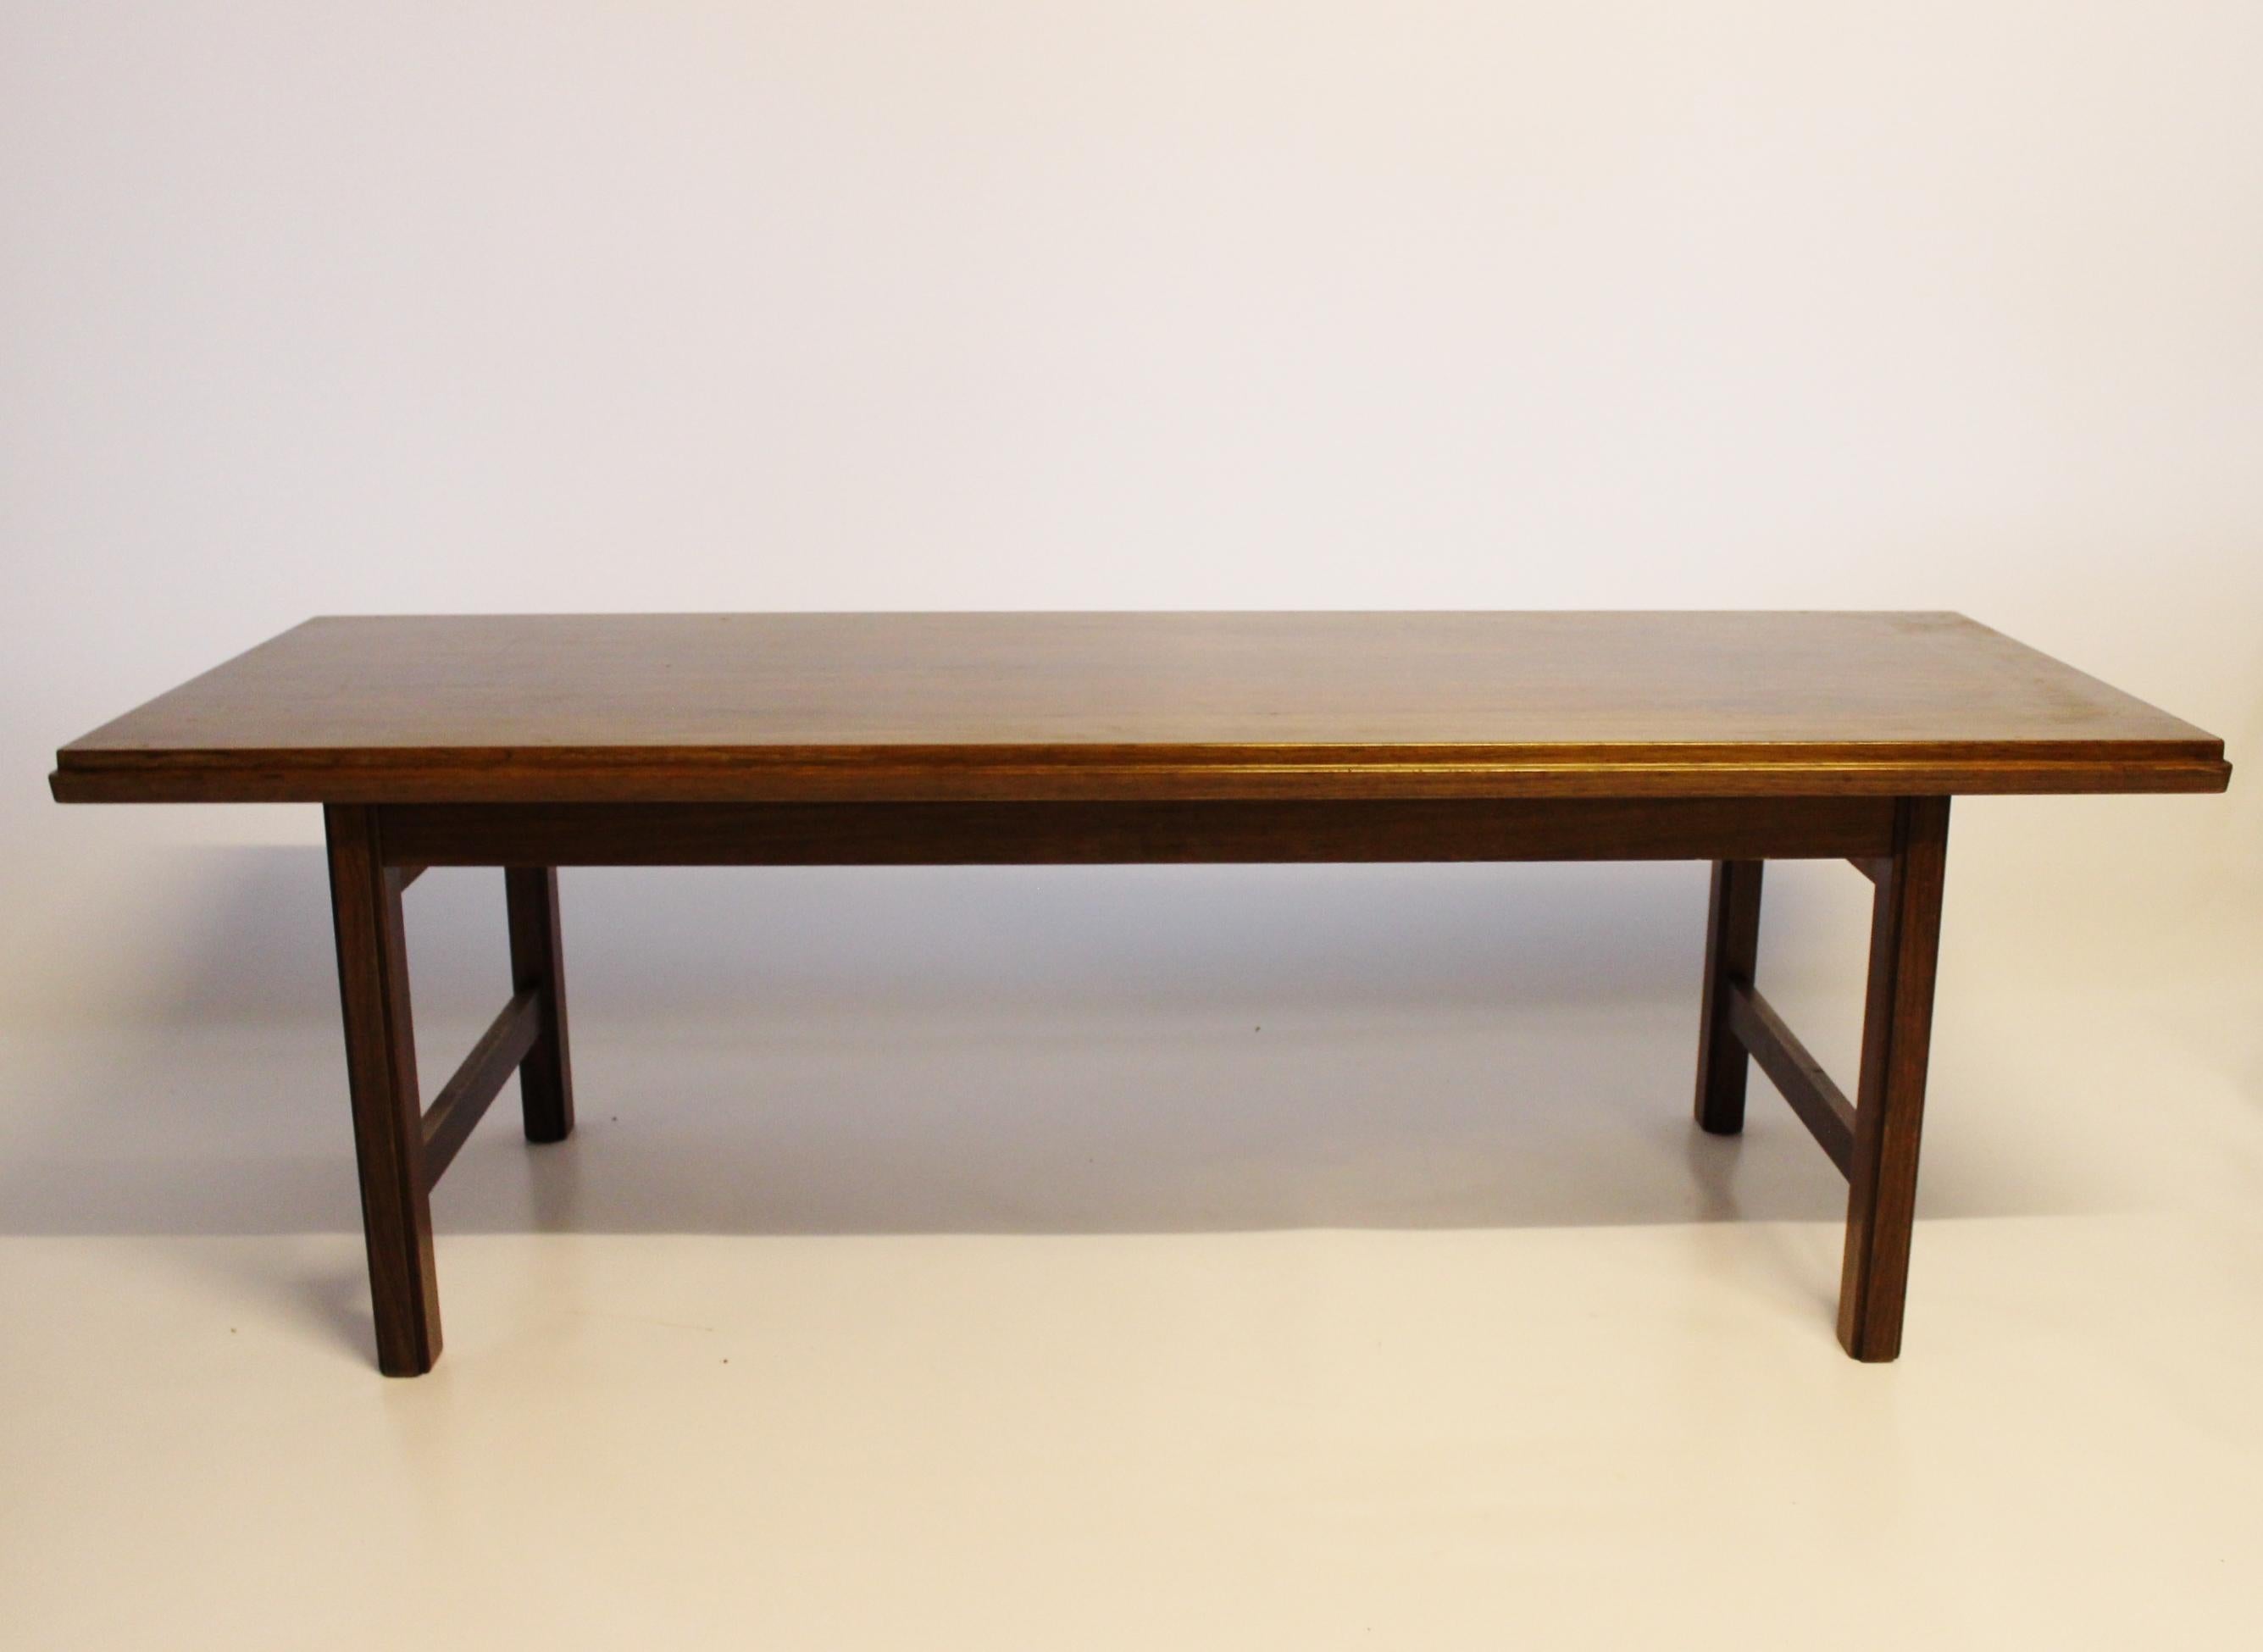 The coffee table is a beautiful example of Danish design from the 1960s, made of rosewood. It is a piece of furniture that exudes elegance and timeless beauty with its beautiful wooden structure and well-crafted details. Rosewood is known for its